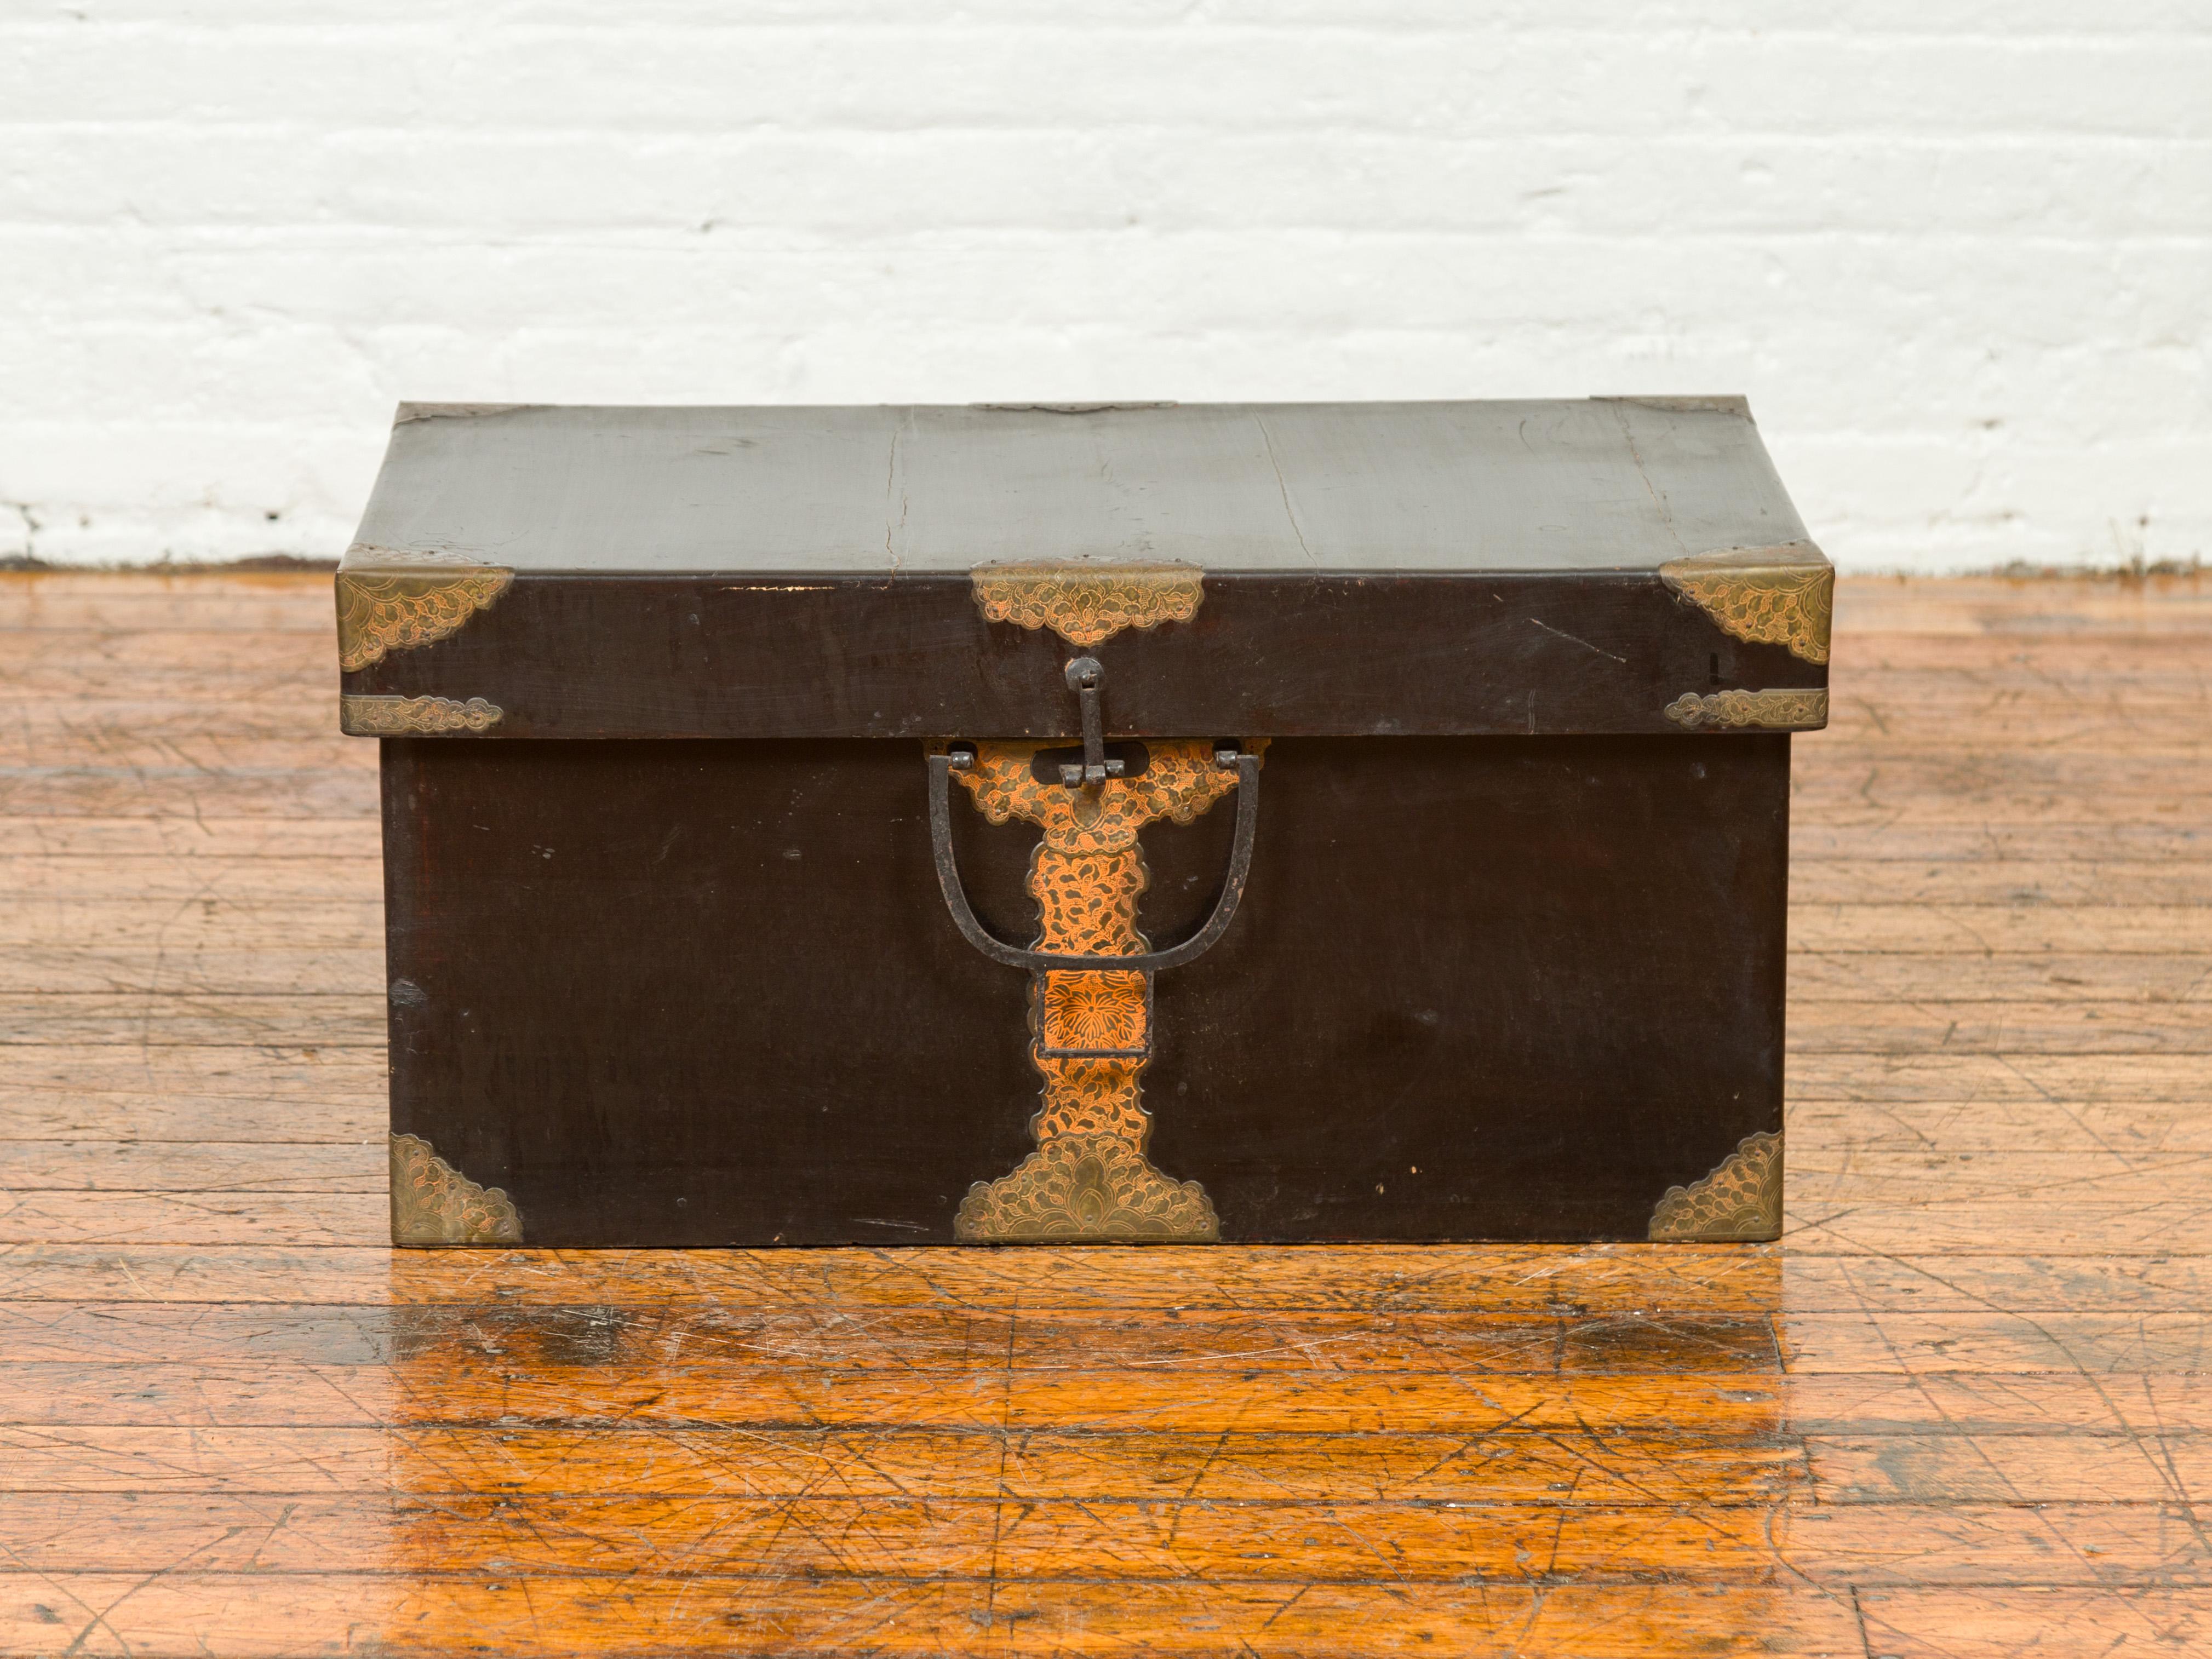 A Japanese Taisho period kiri wood lidded box from the early 20th century, with cut brass hardware. Crafted in Japan during the first quarter of the 20th century, this large decorative box is made of kiri wood, a fine grained hardwood, boasting a